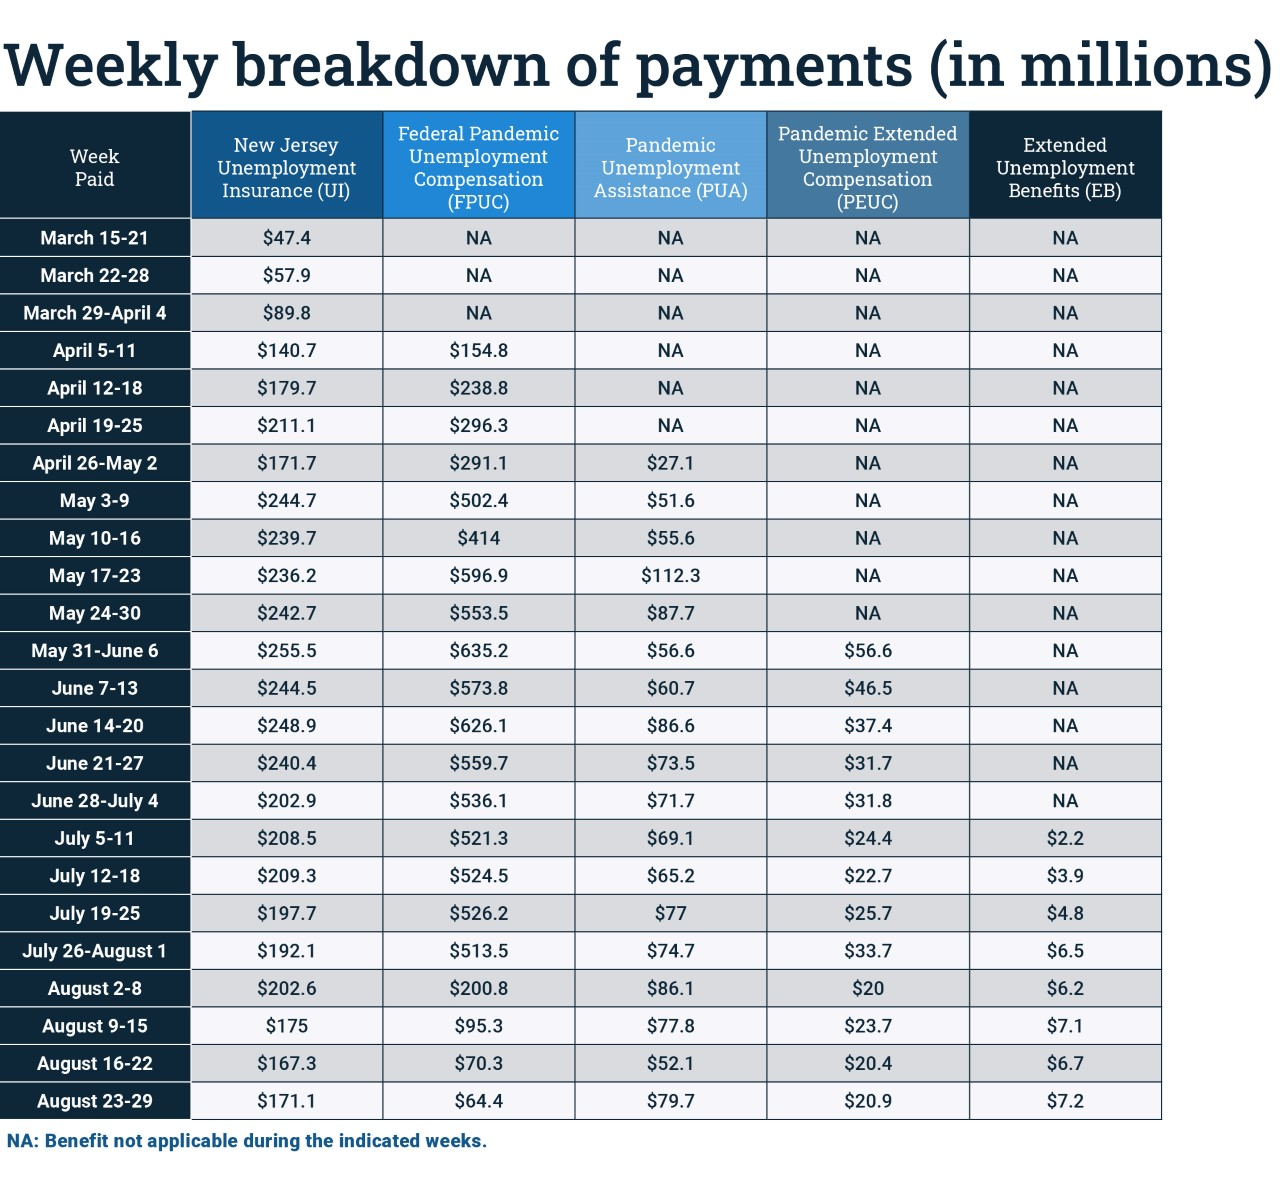 a weekly breakdown of payments